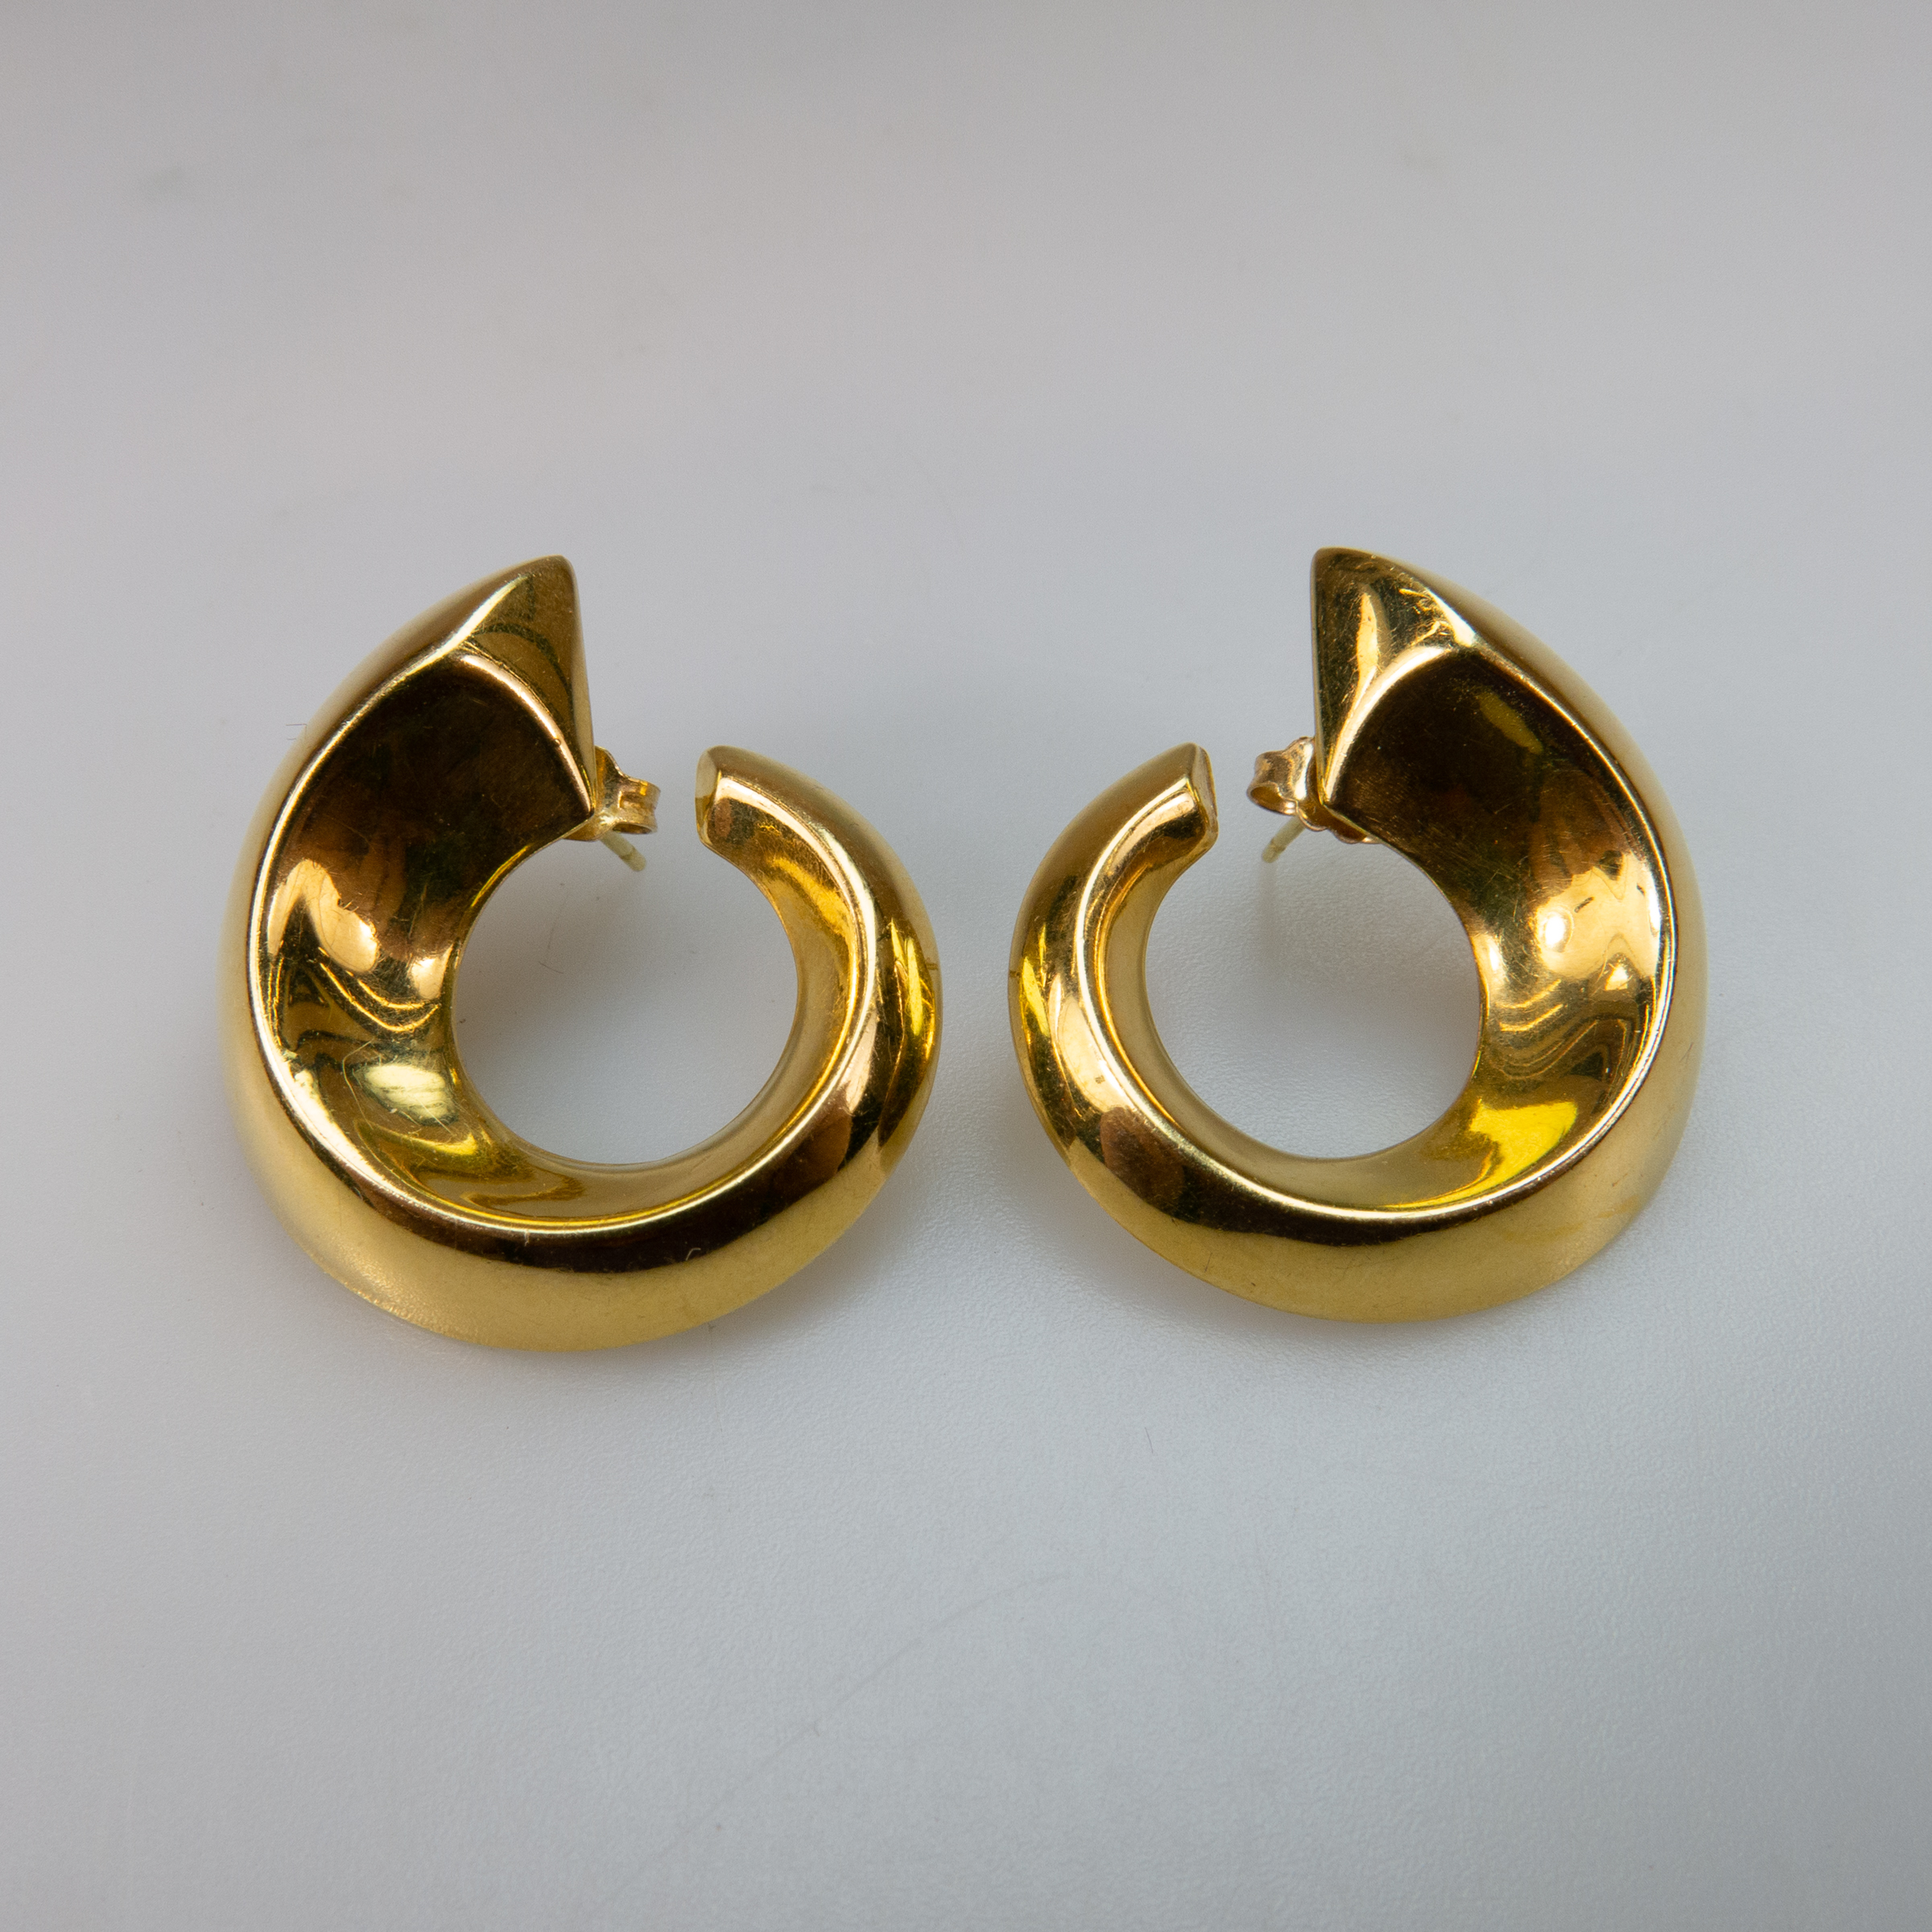 Pair Of Italian 18k Yellow Gold Abstract Earrings